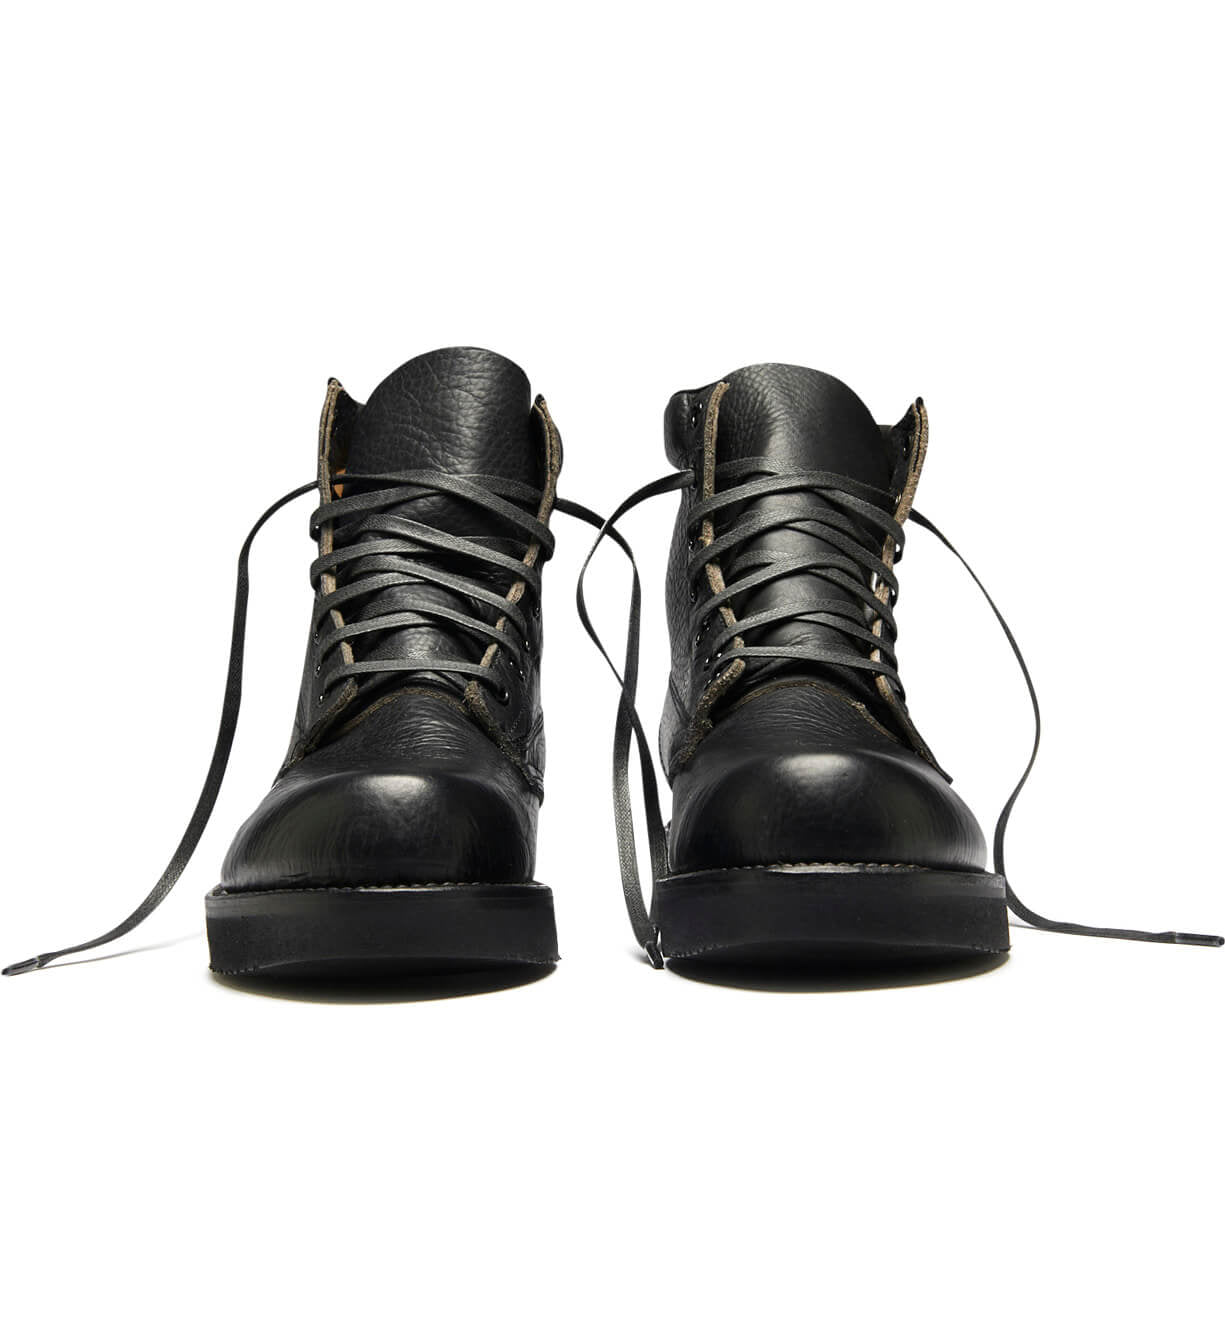 A pair of James Boots from the Broken Homme collection, showcased on a white background.